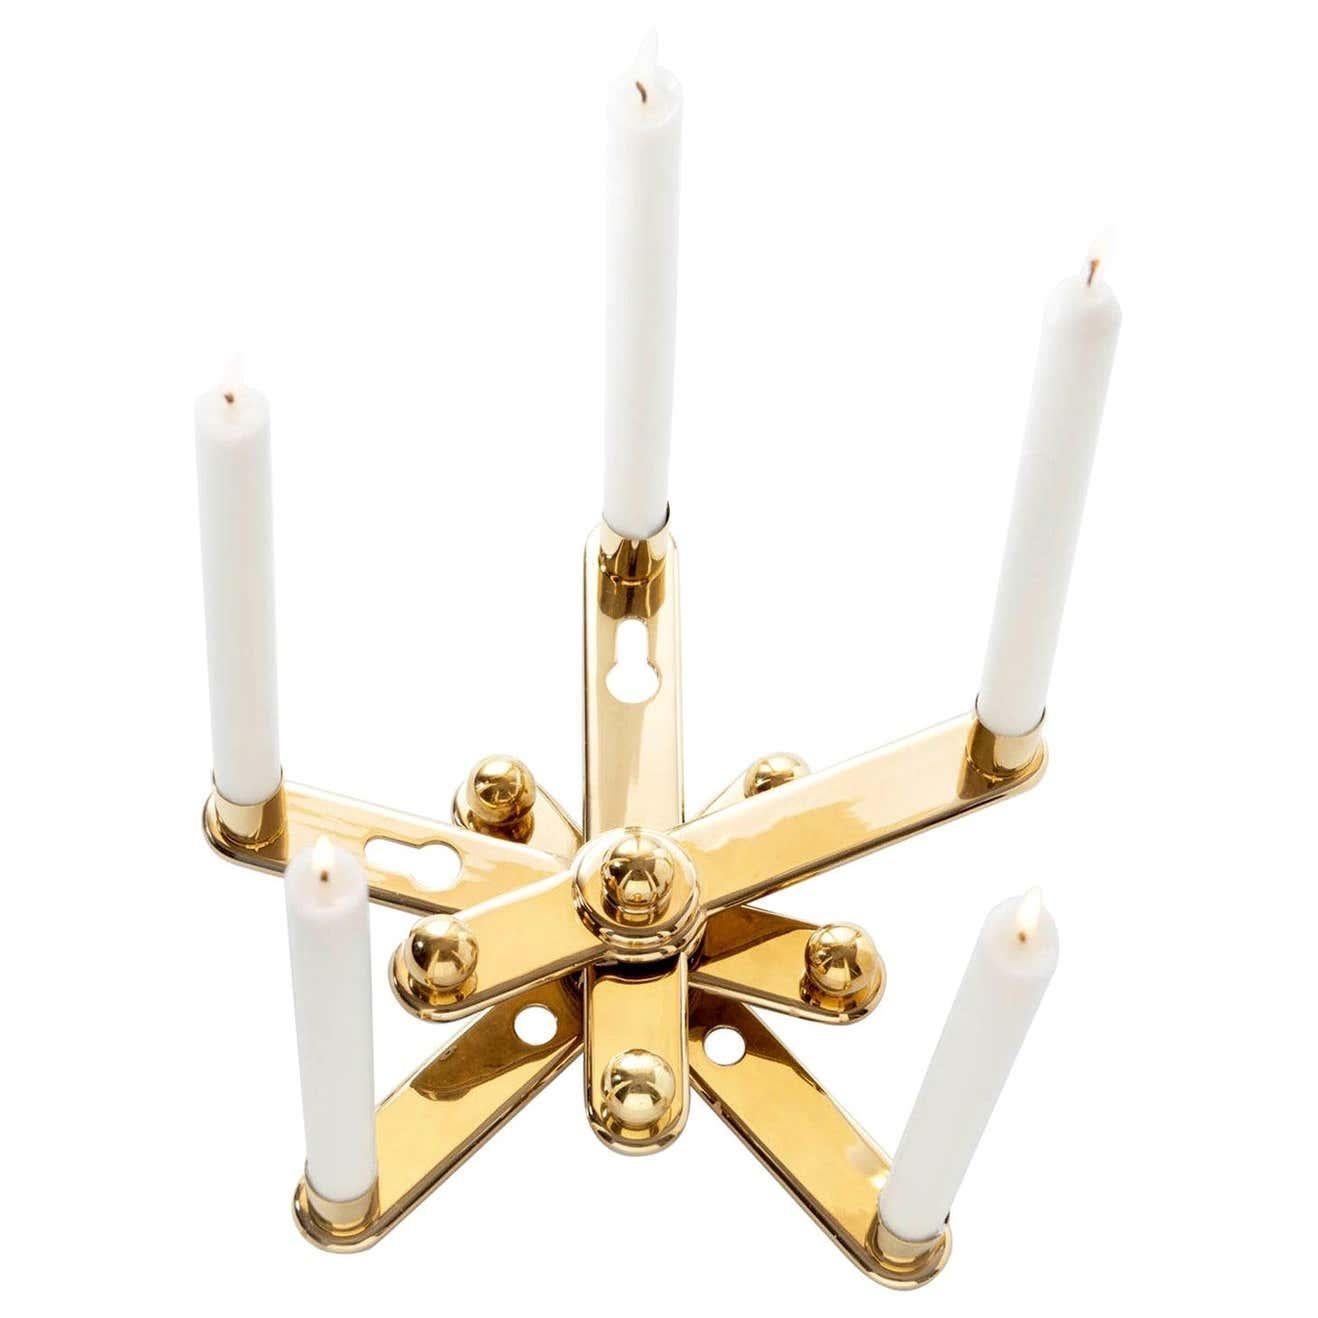 Curro Claret Contemporary Candleholder Brass Limited Edition In New Condition For Sale In Barcelona, Barcelona